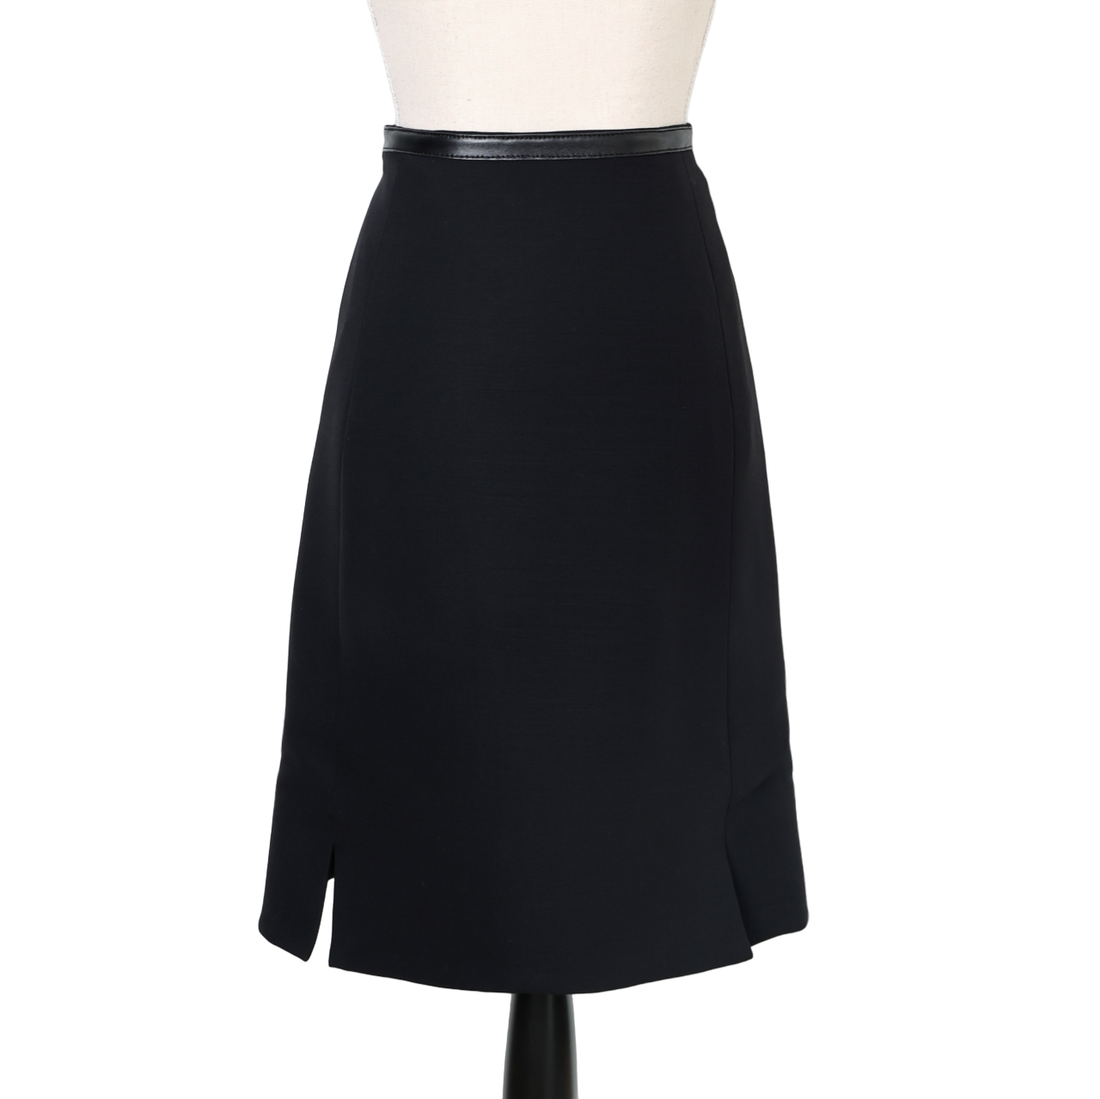 Louis Vuitton skirt with zip and integrated leather belt